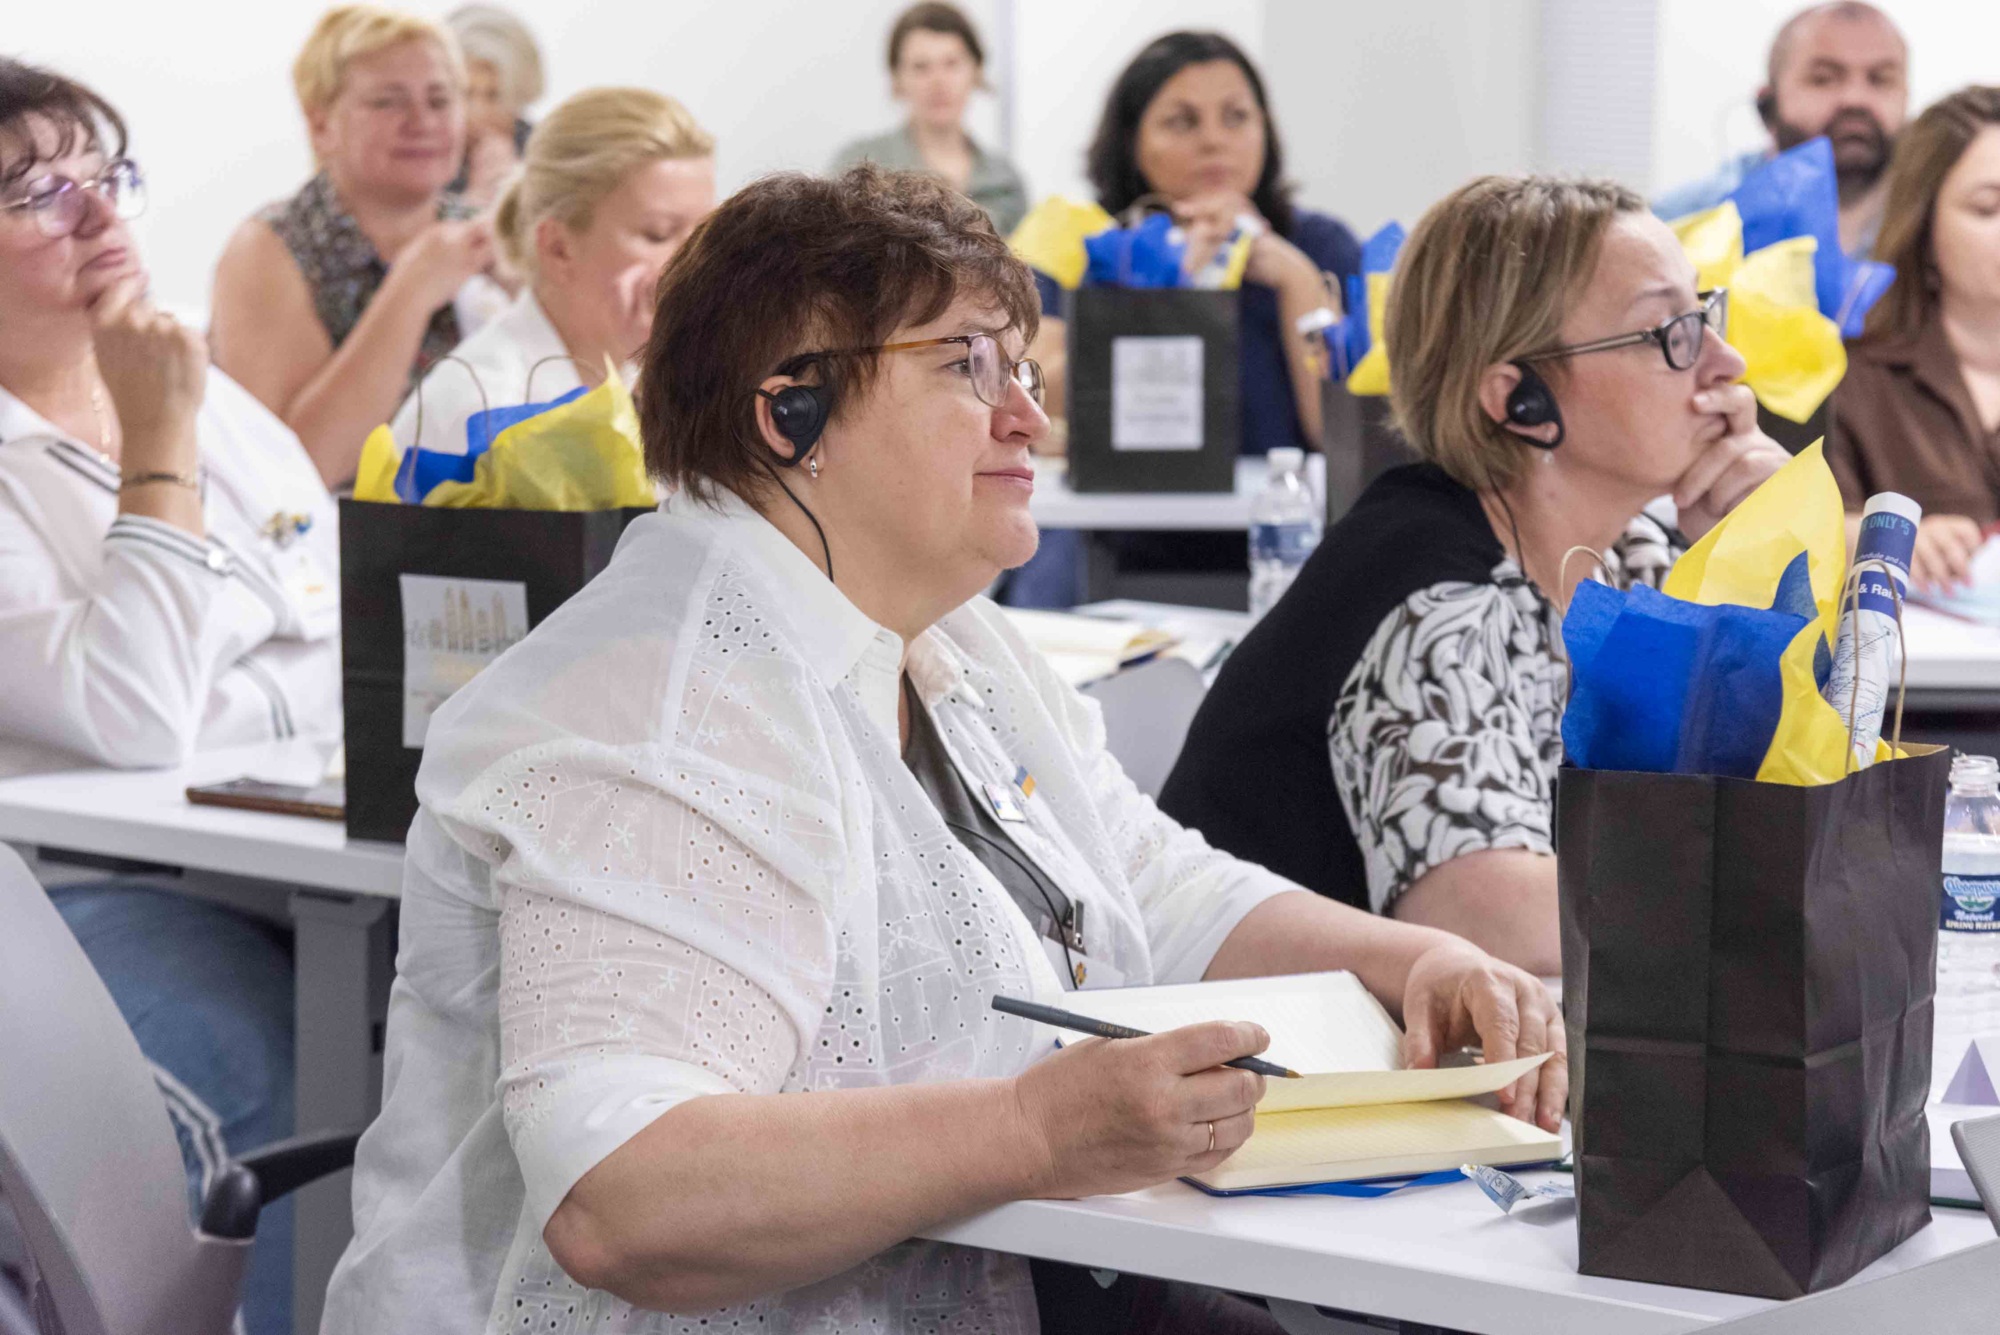 Ukrainian delegates with earpieces for translation watching the presentation